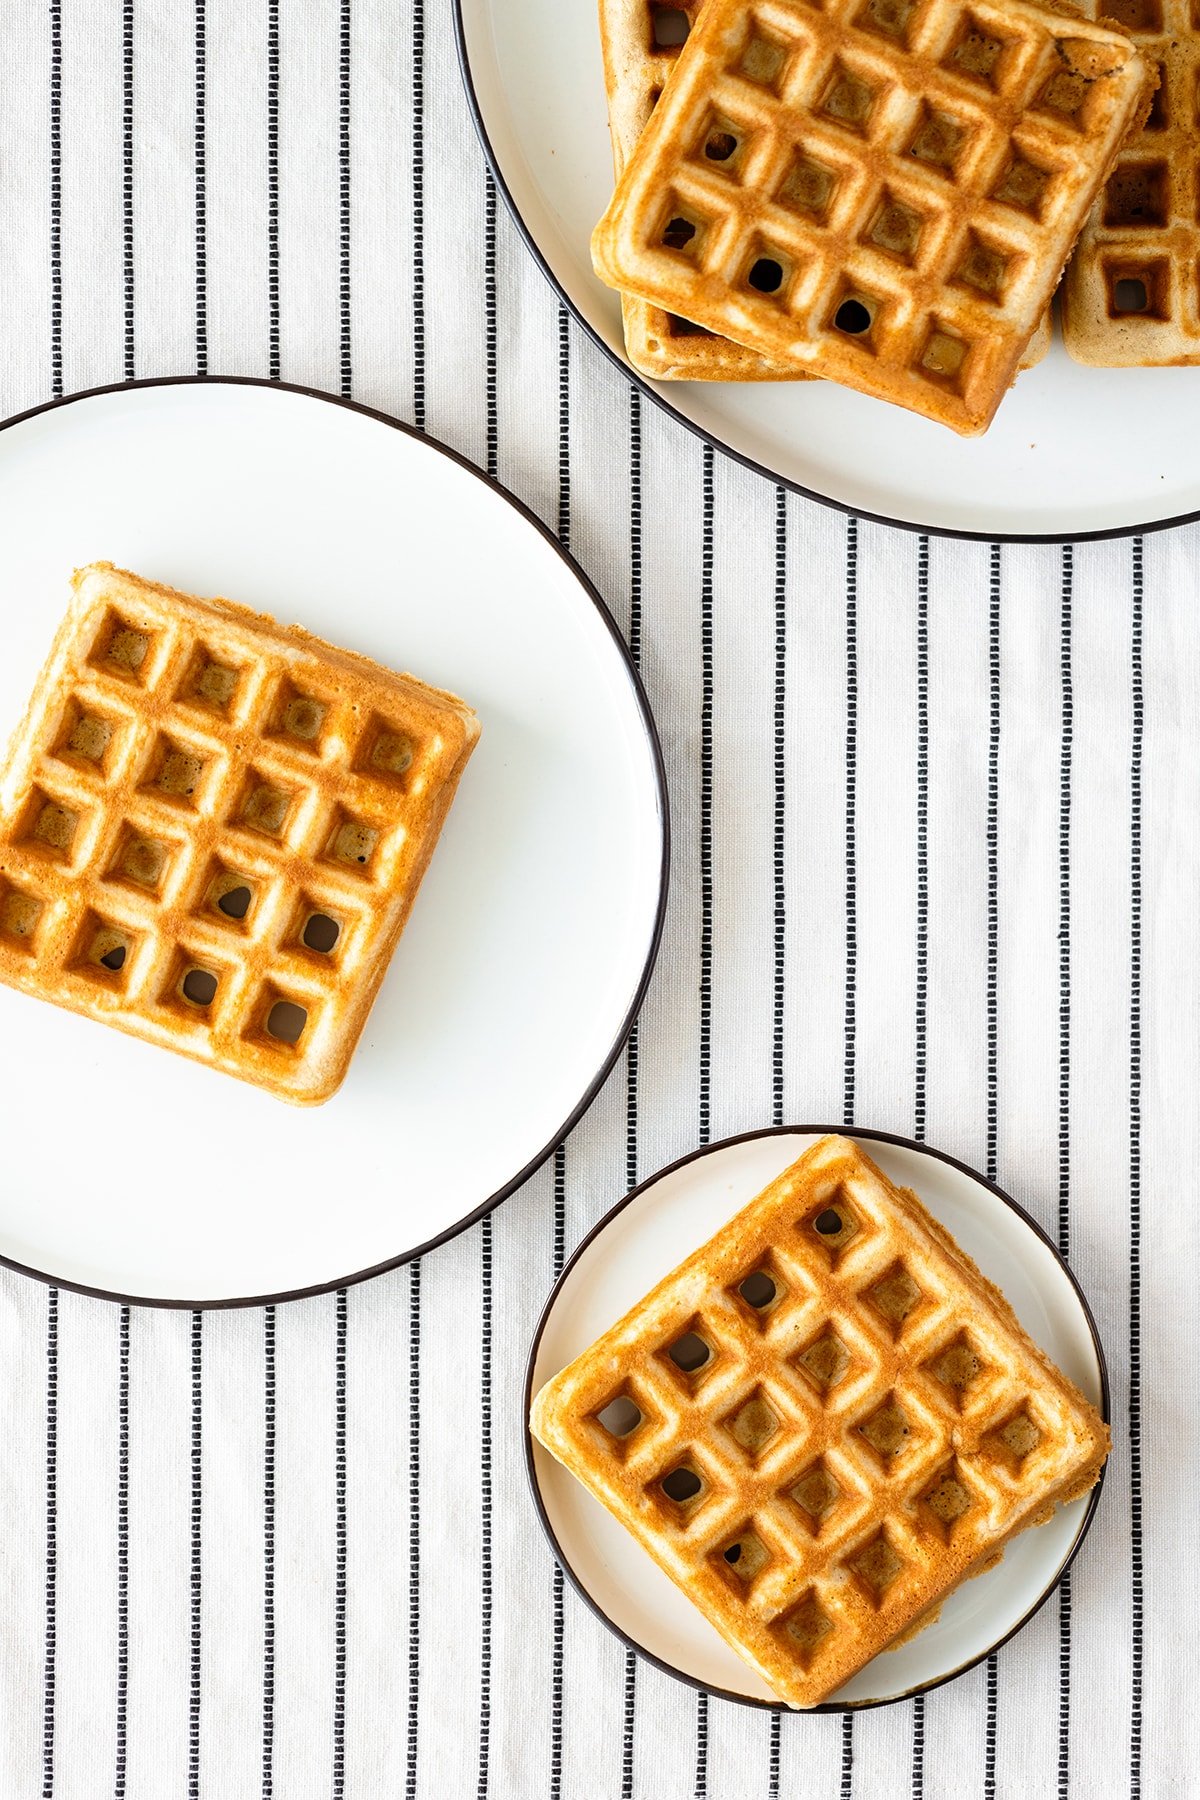 Basic Gluten-free Waffles on a white plate and a white table cloth with black stripes